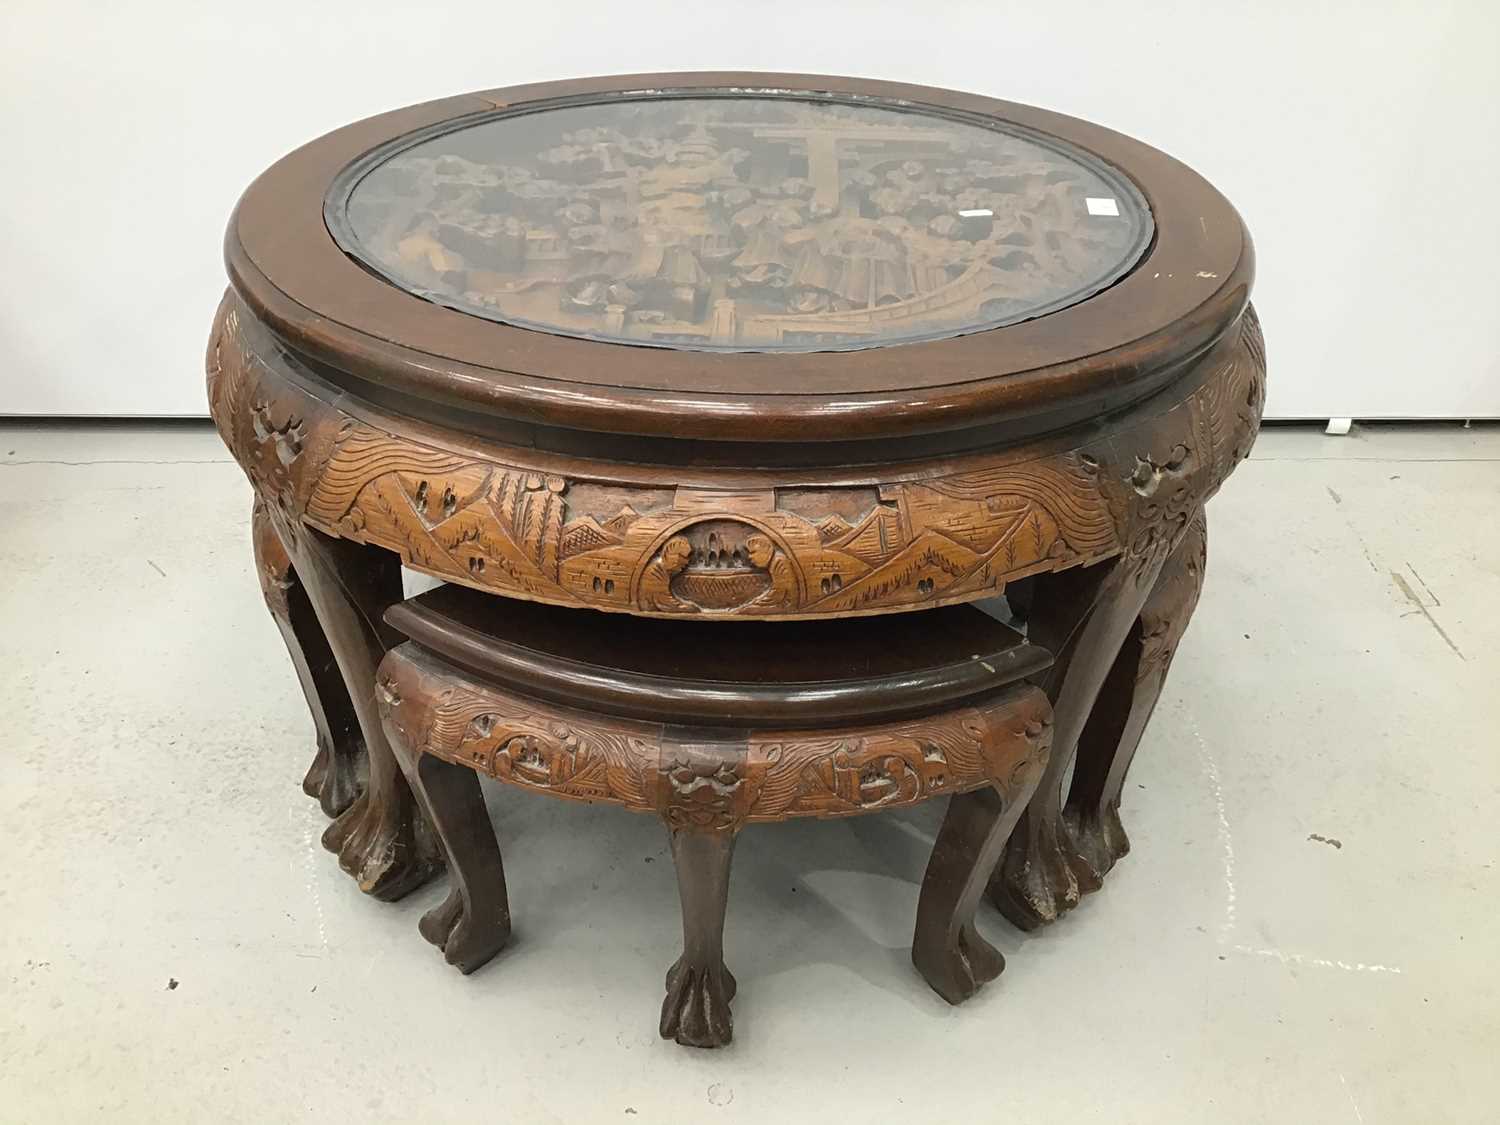 Lot 8 - Chinese circular carved coffee table with integral nest of tables